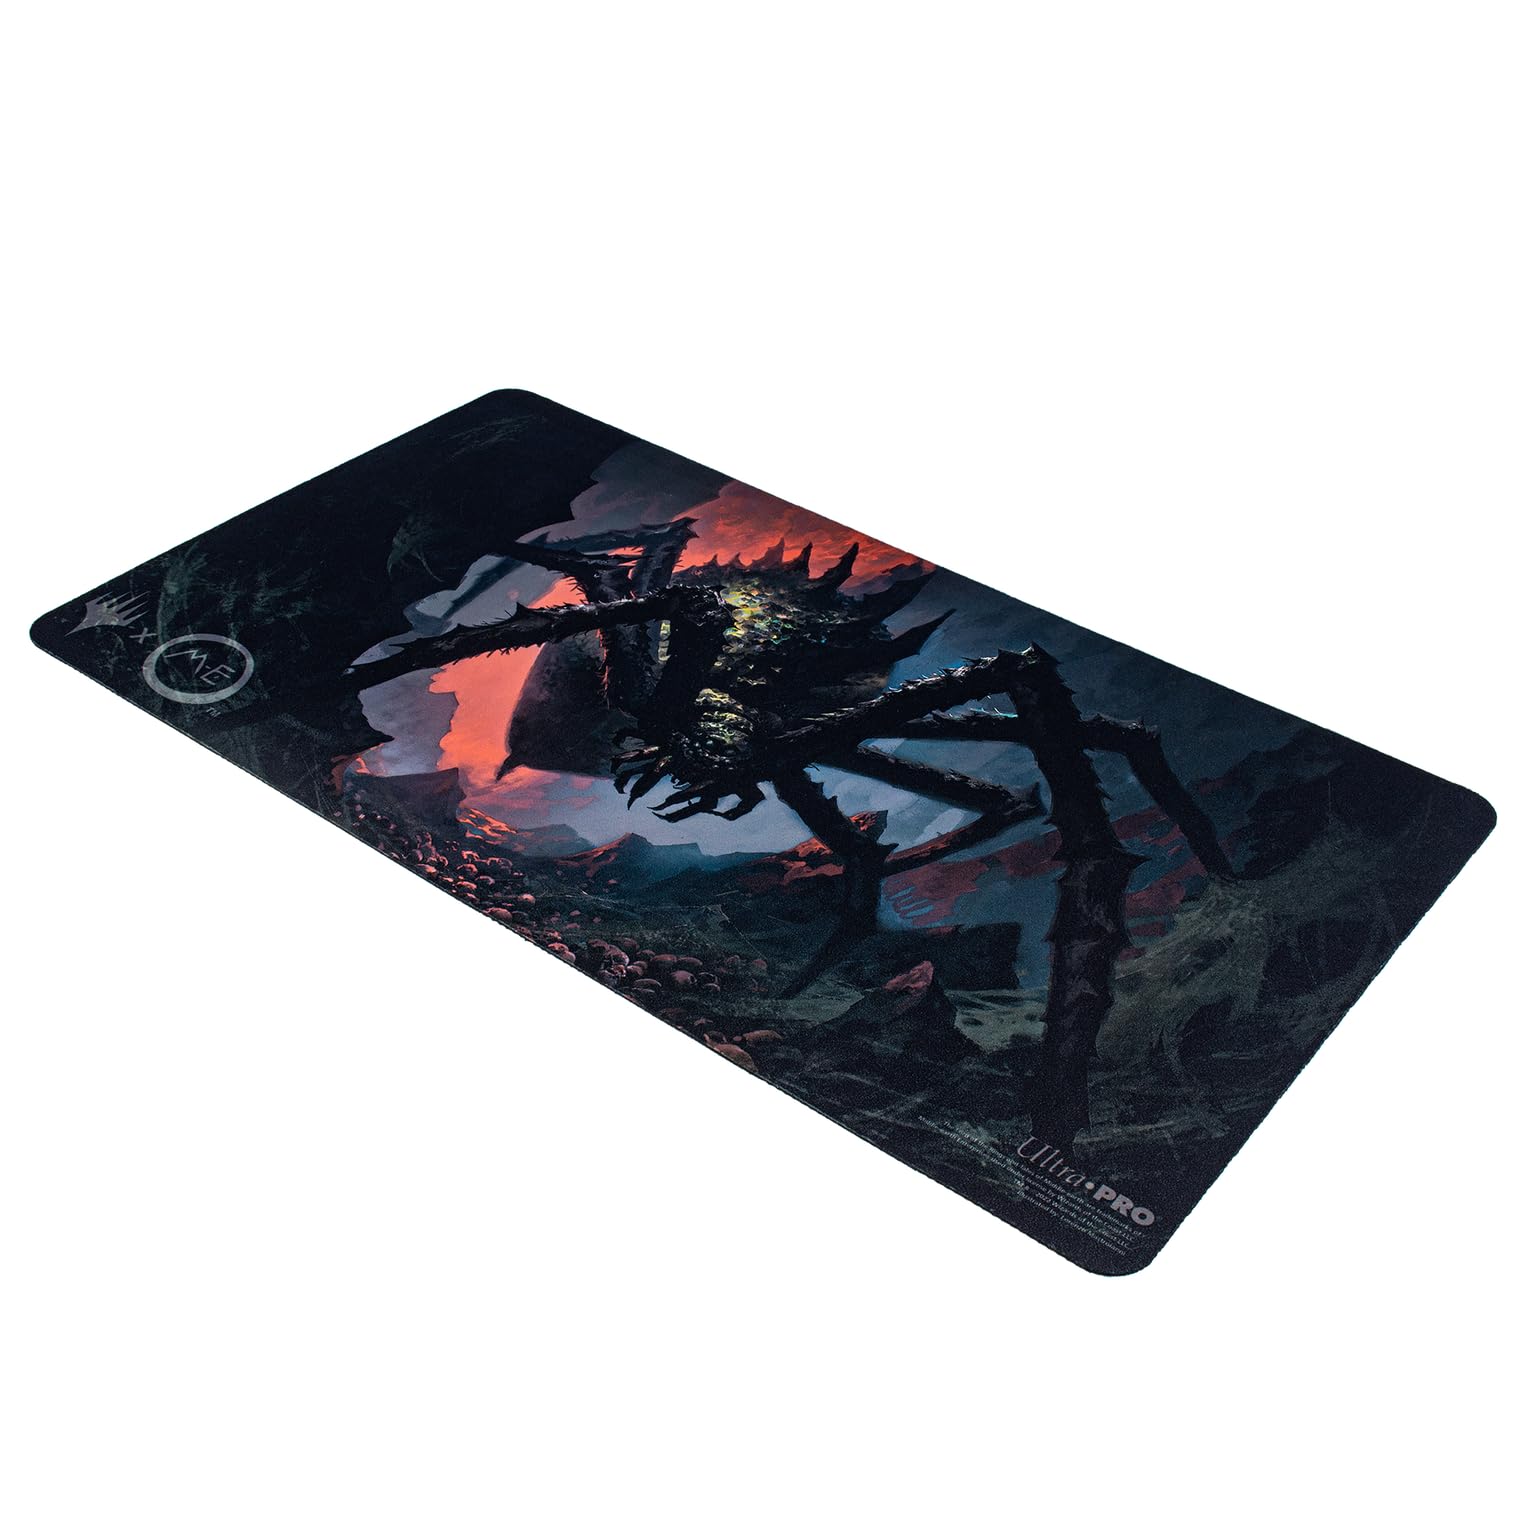 Ultra PRO - The Lord of The Rings: Tales of Middle-Earth Playmat Featuring: Shelob for Magic: The Gathering, Protect Cards During Gameplay, Use as Mousepad, & Desk Mat